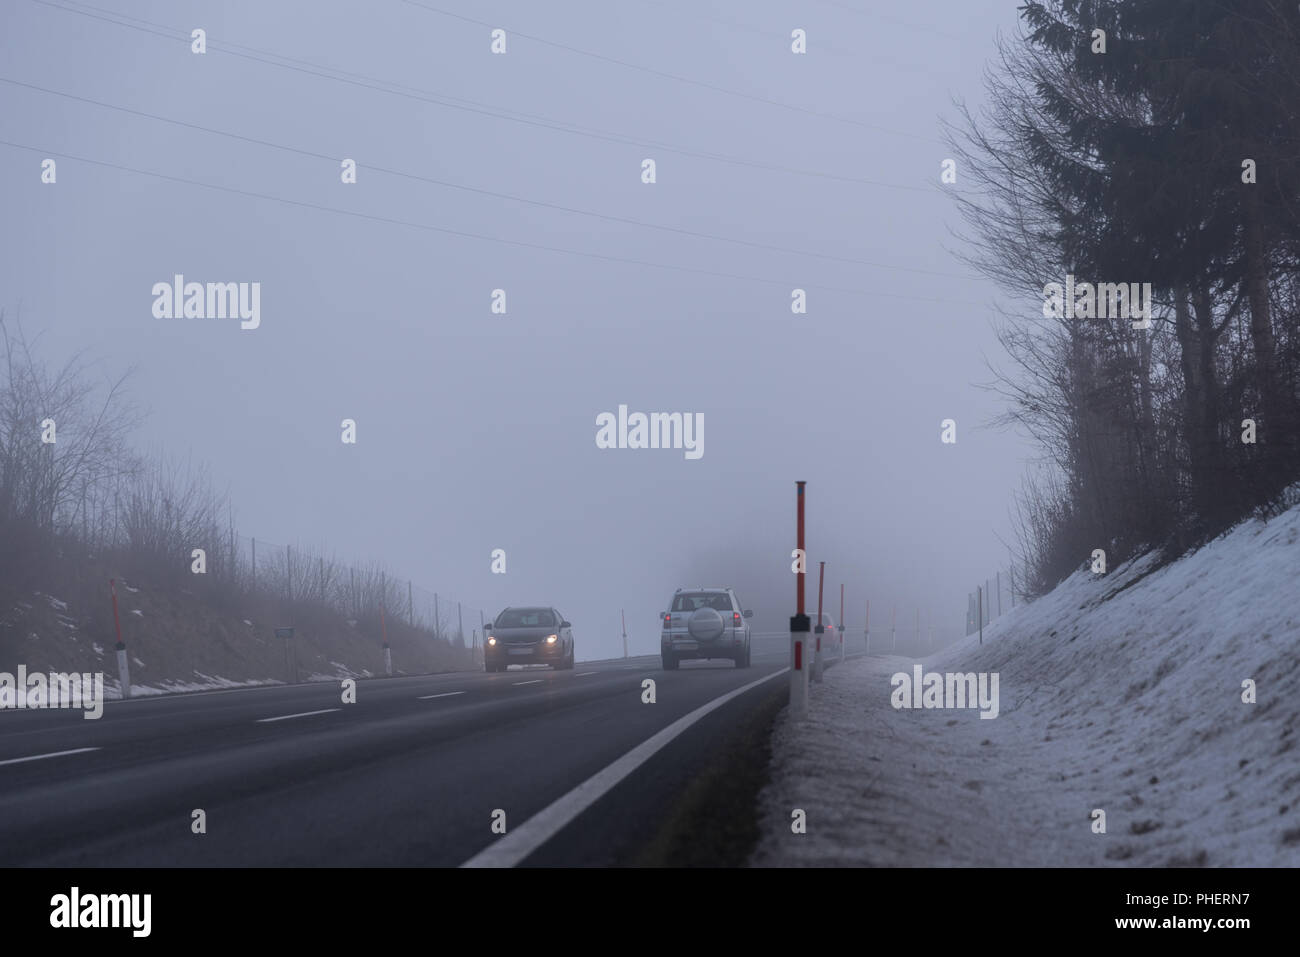 Bad view through fog on a country road Stock Photo